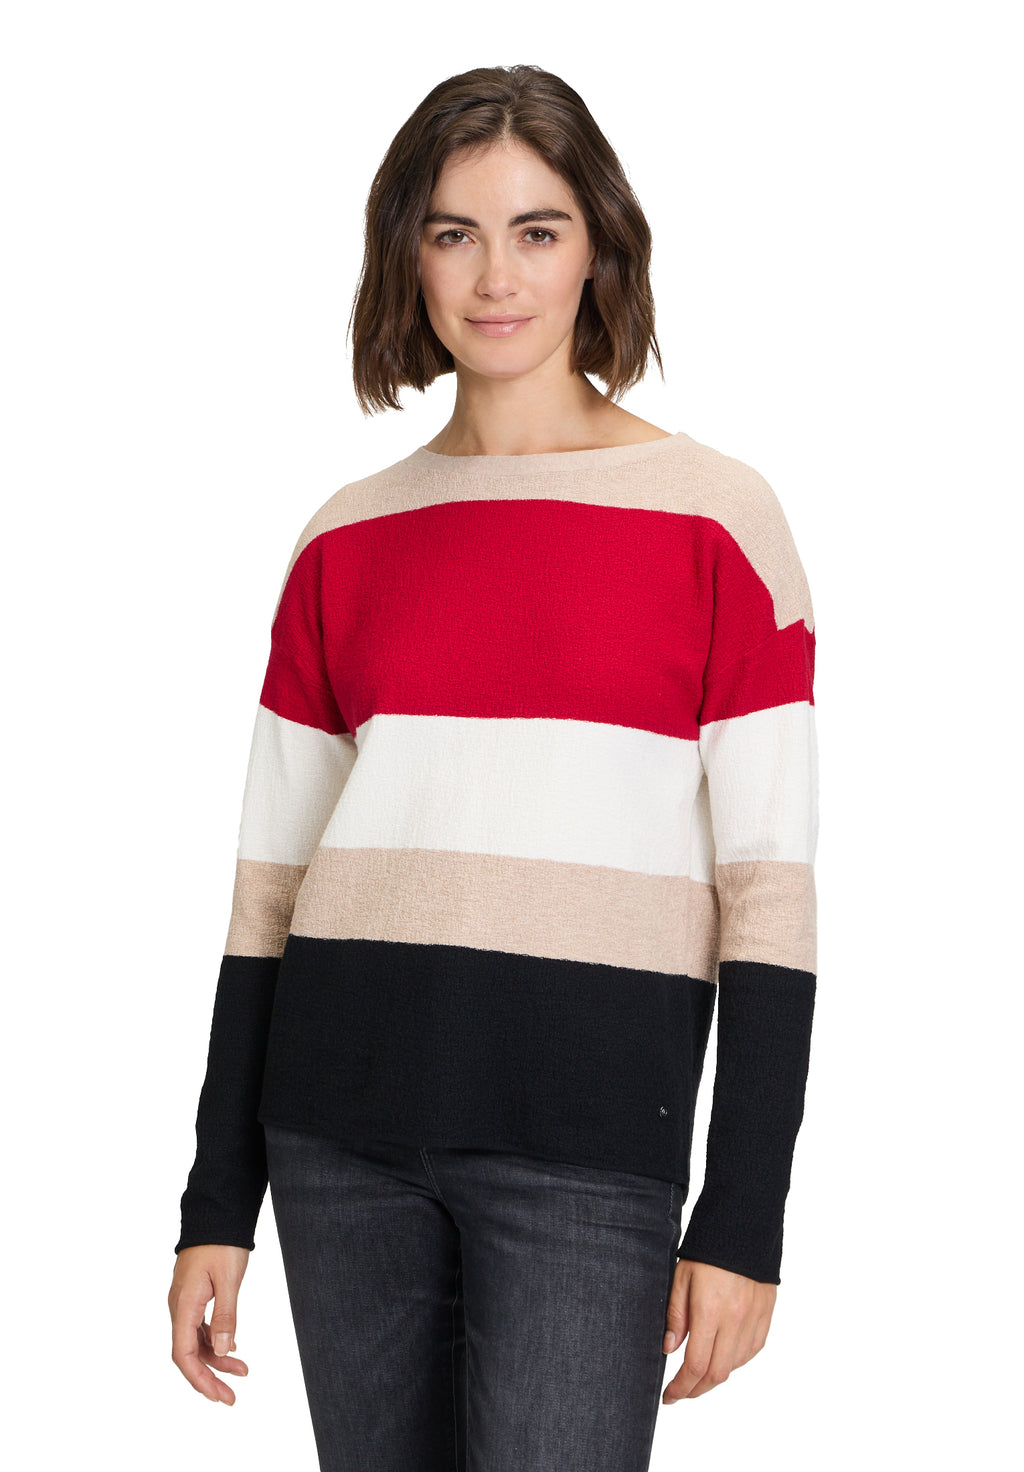 Betty&Co horizontal block striped soft knit jumper in red (front)